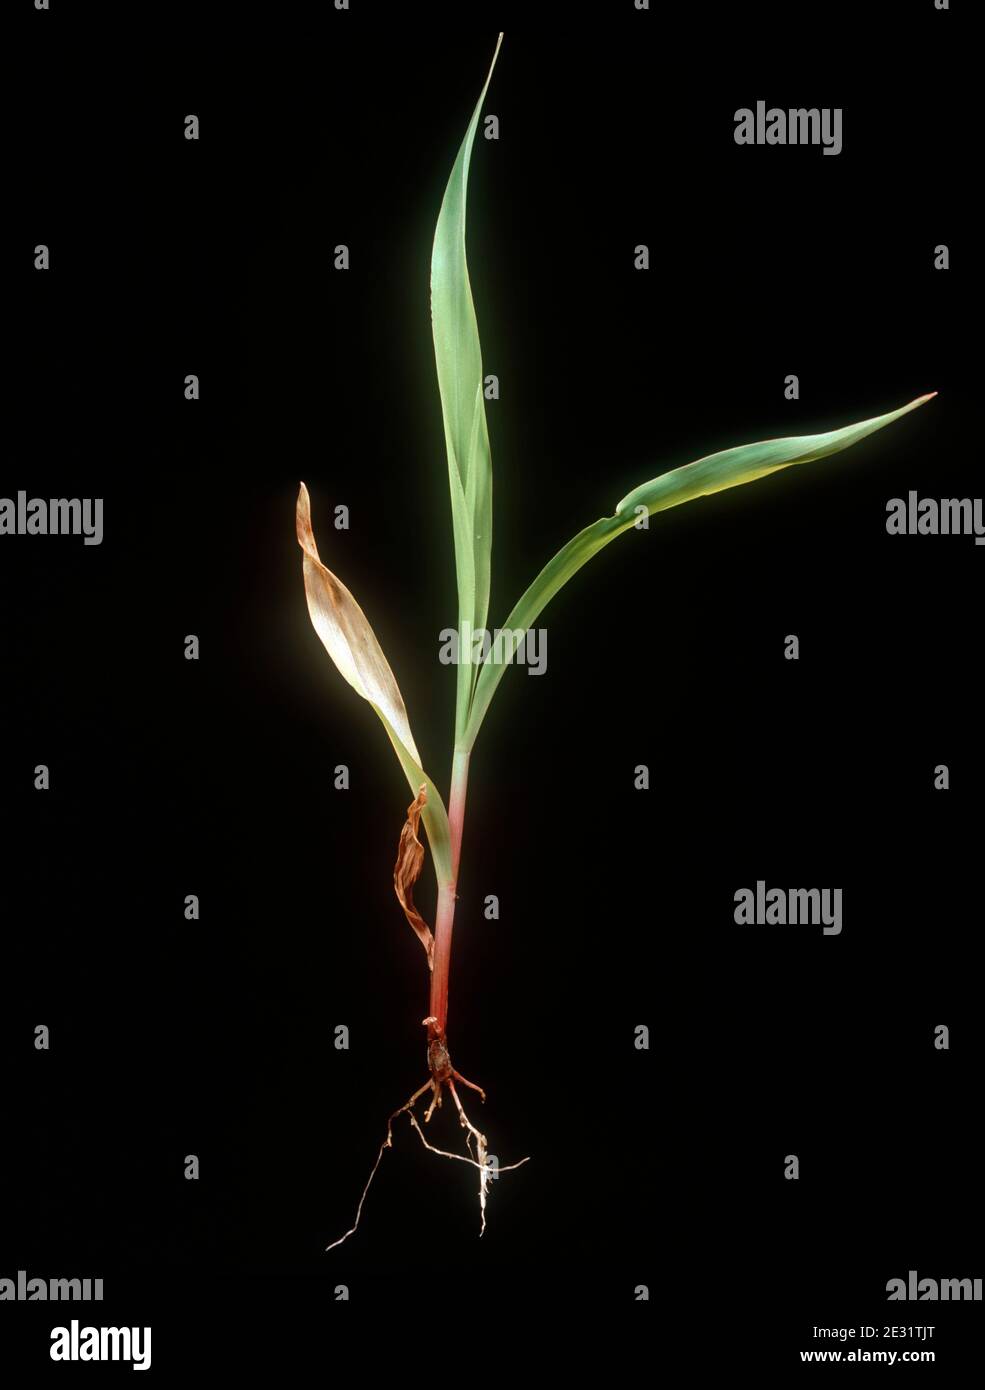 Damage to young maize or corn plant caused by Stewarts wilt (Pantoea stewartii) a serious bacterial disease Stock Photo